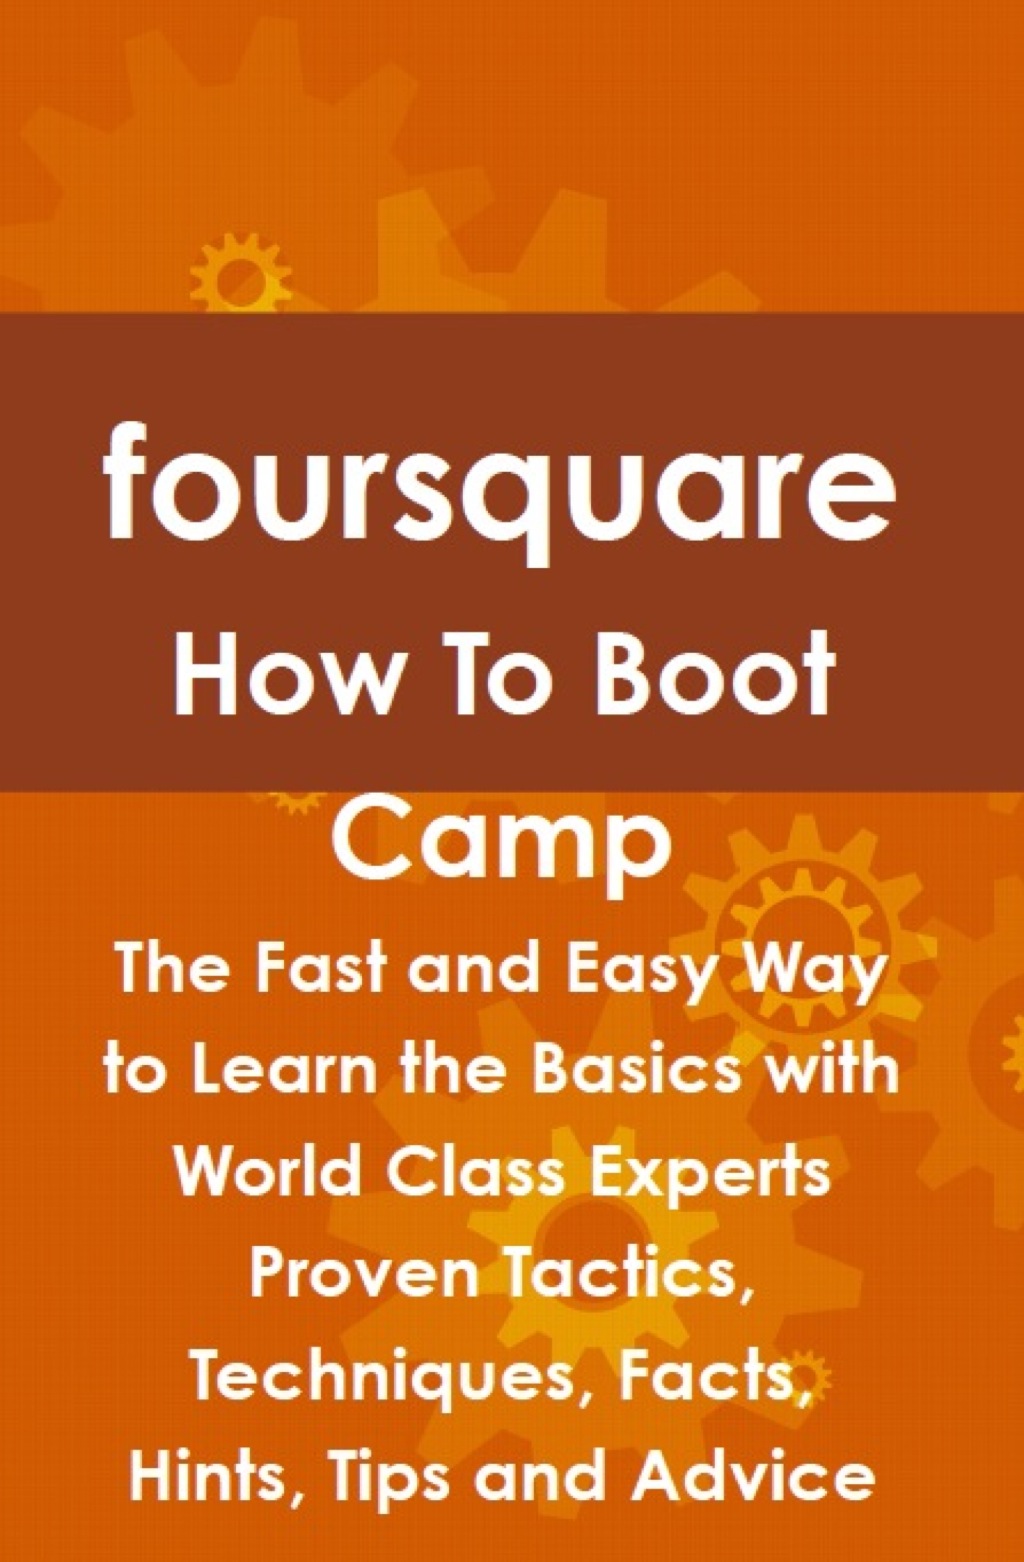 foursquare How To Boot Camp: The Fast and Easy Way to Learn the Basics with World Class Experts Proven Tactics  Technique (eBook) - Jeff Judd,